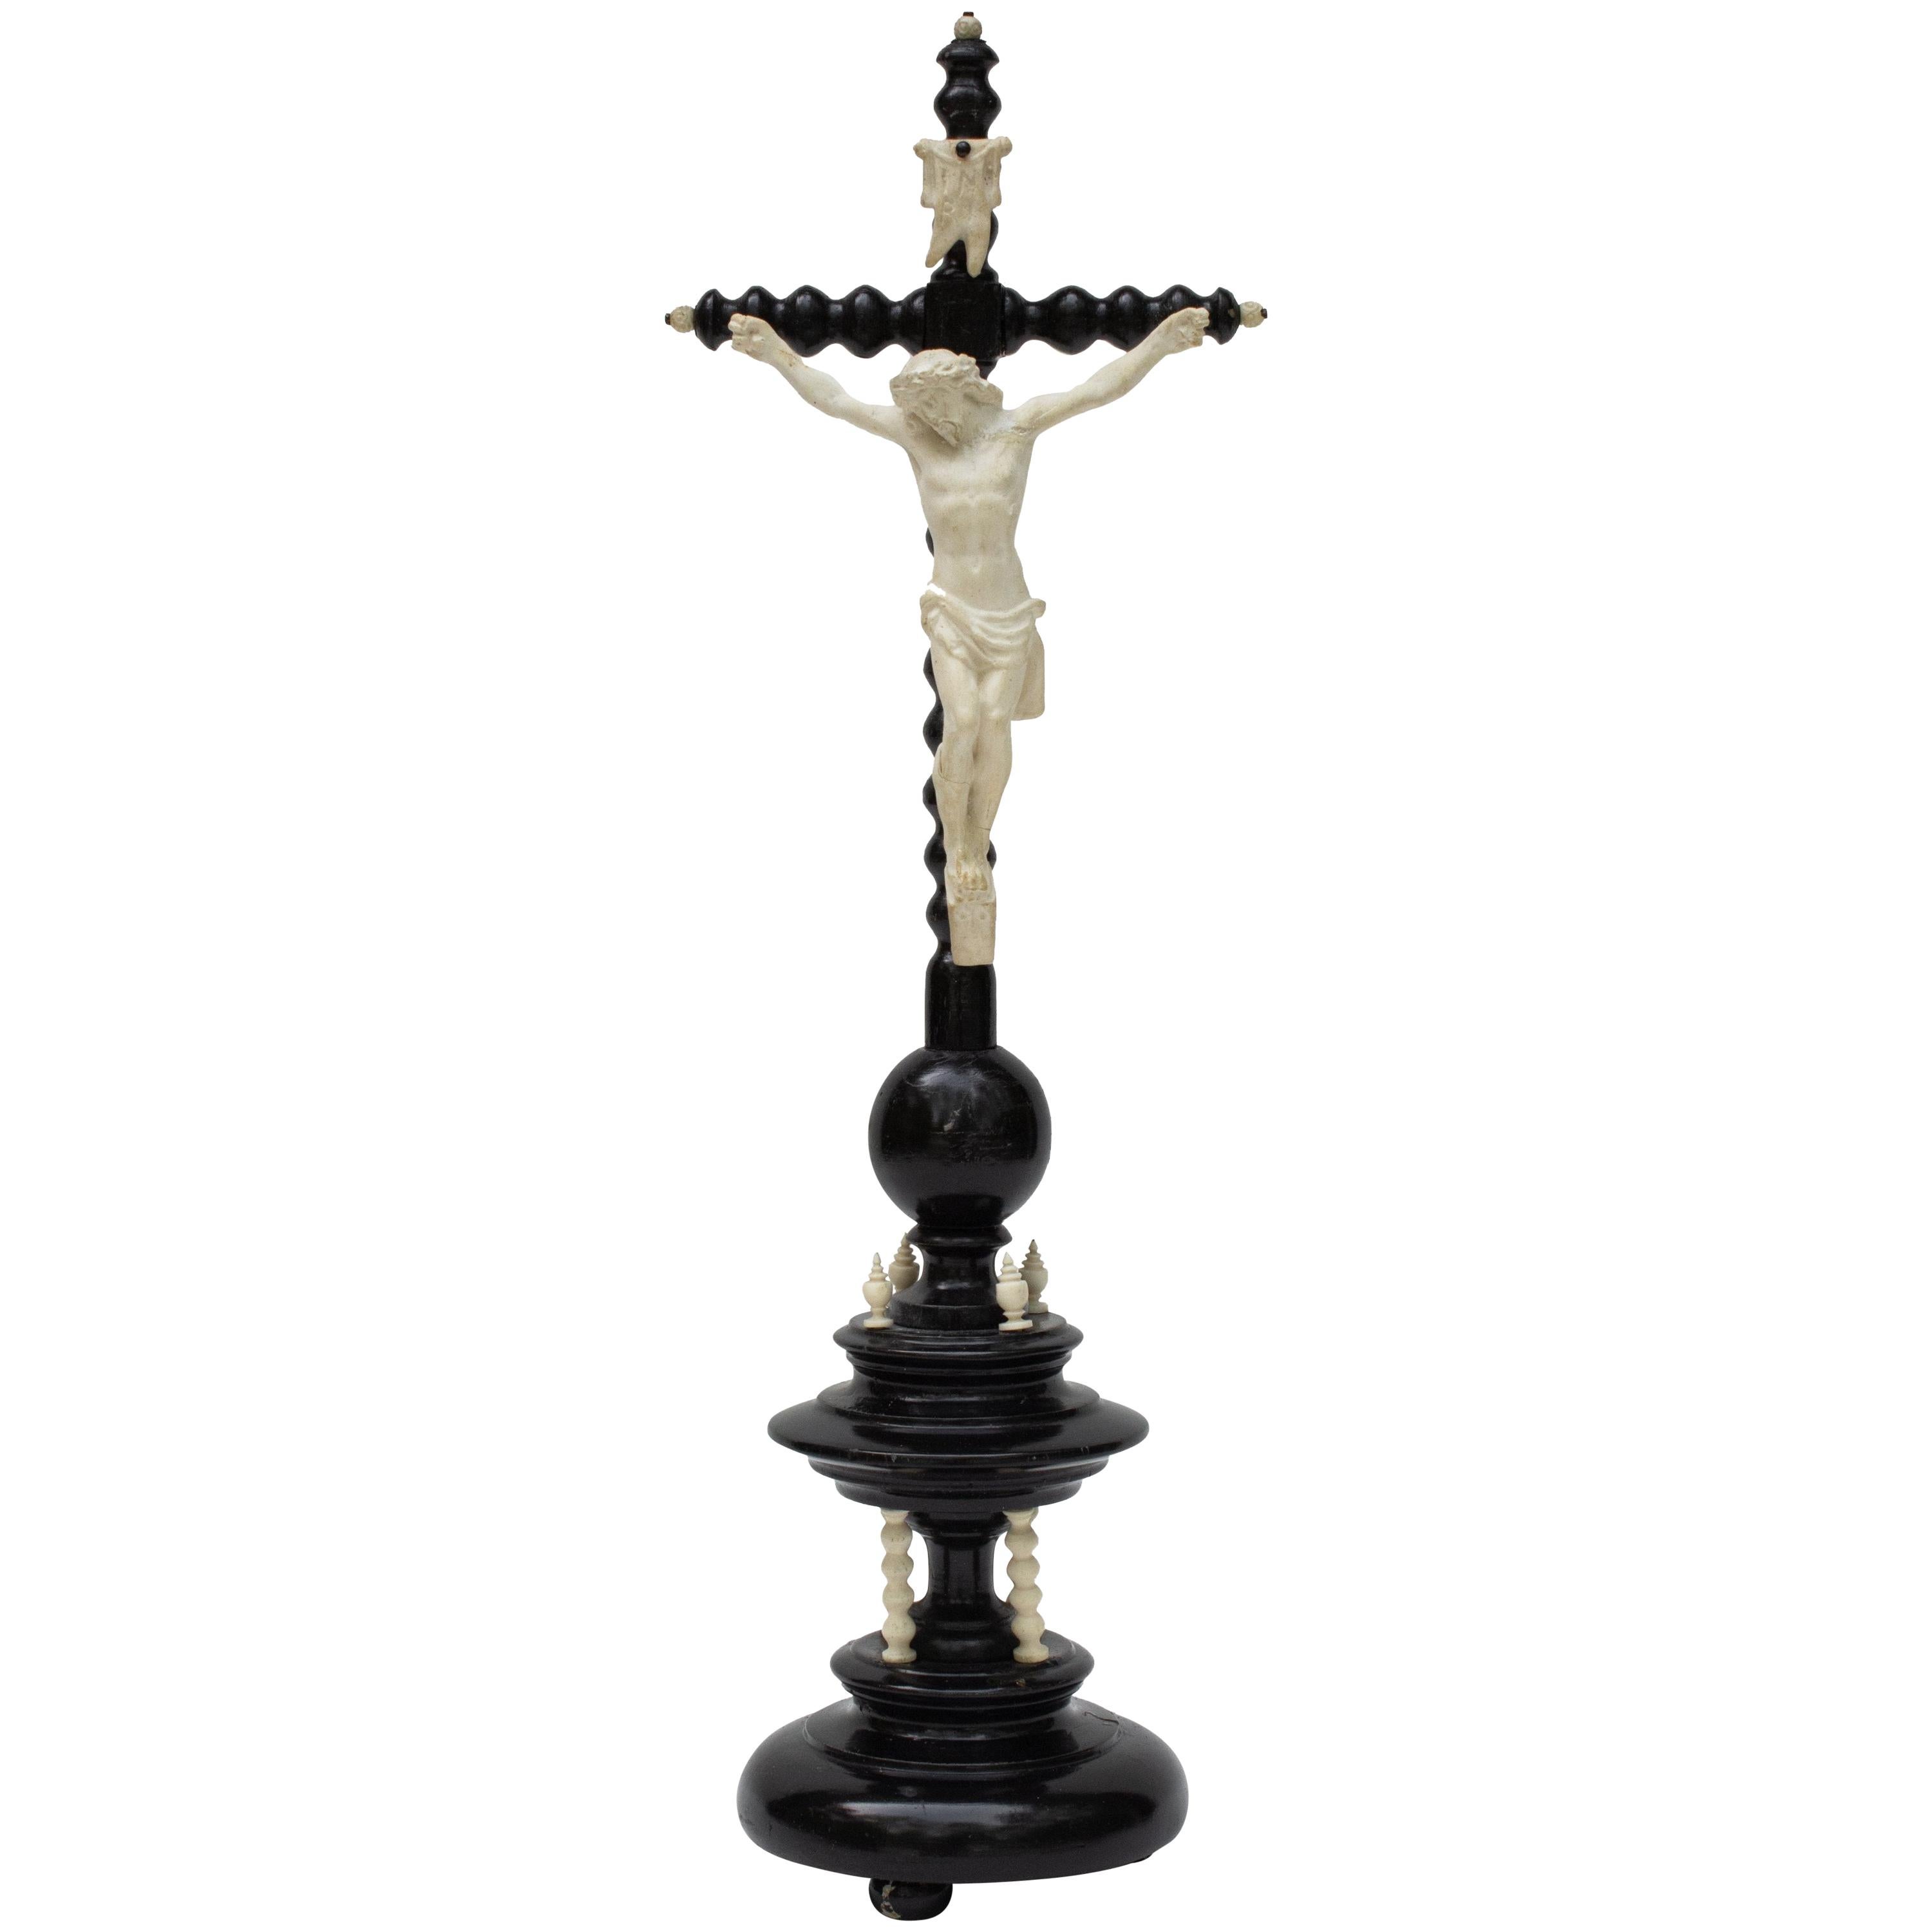 19th Century French Turned Wood Crucifix with Porcelain Bisque Figure of Christ